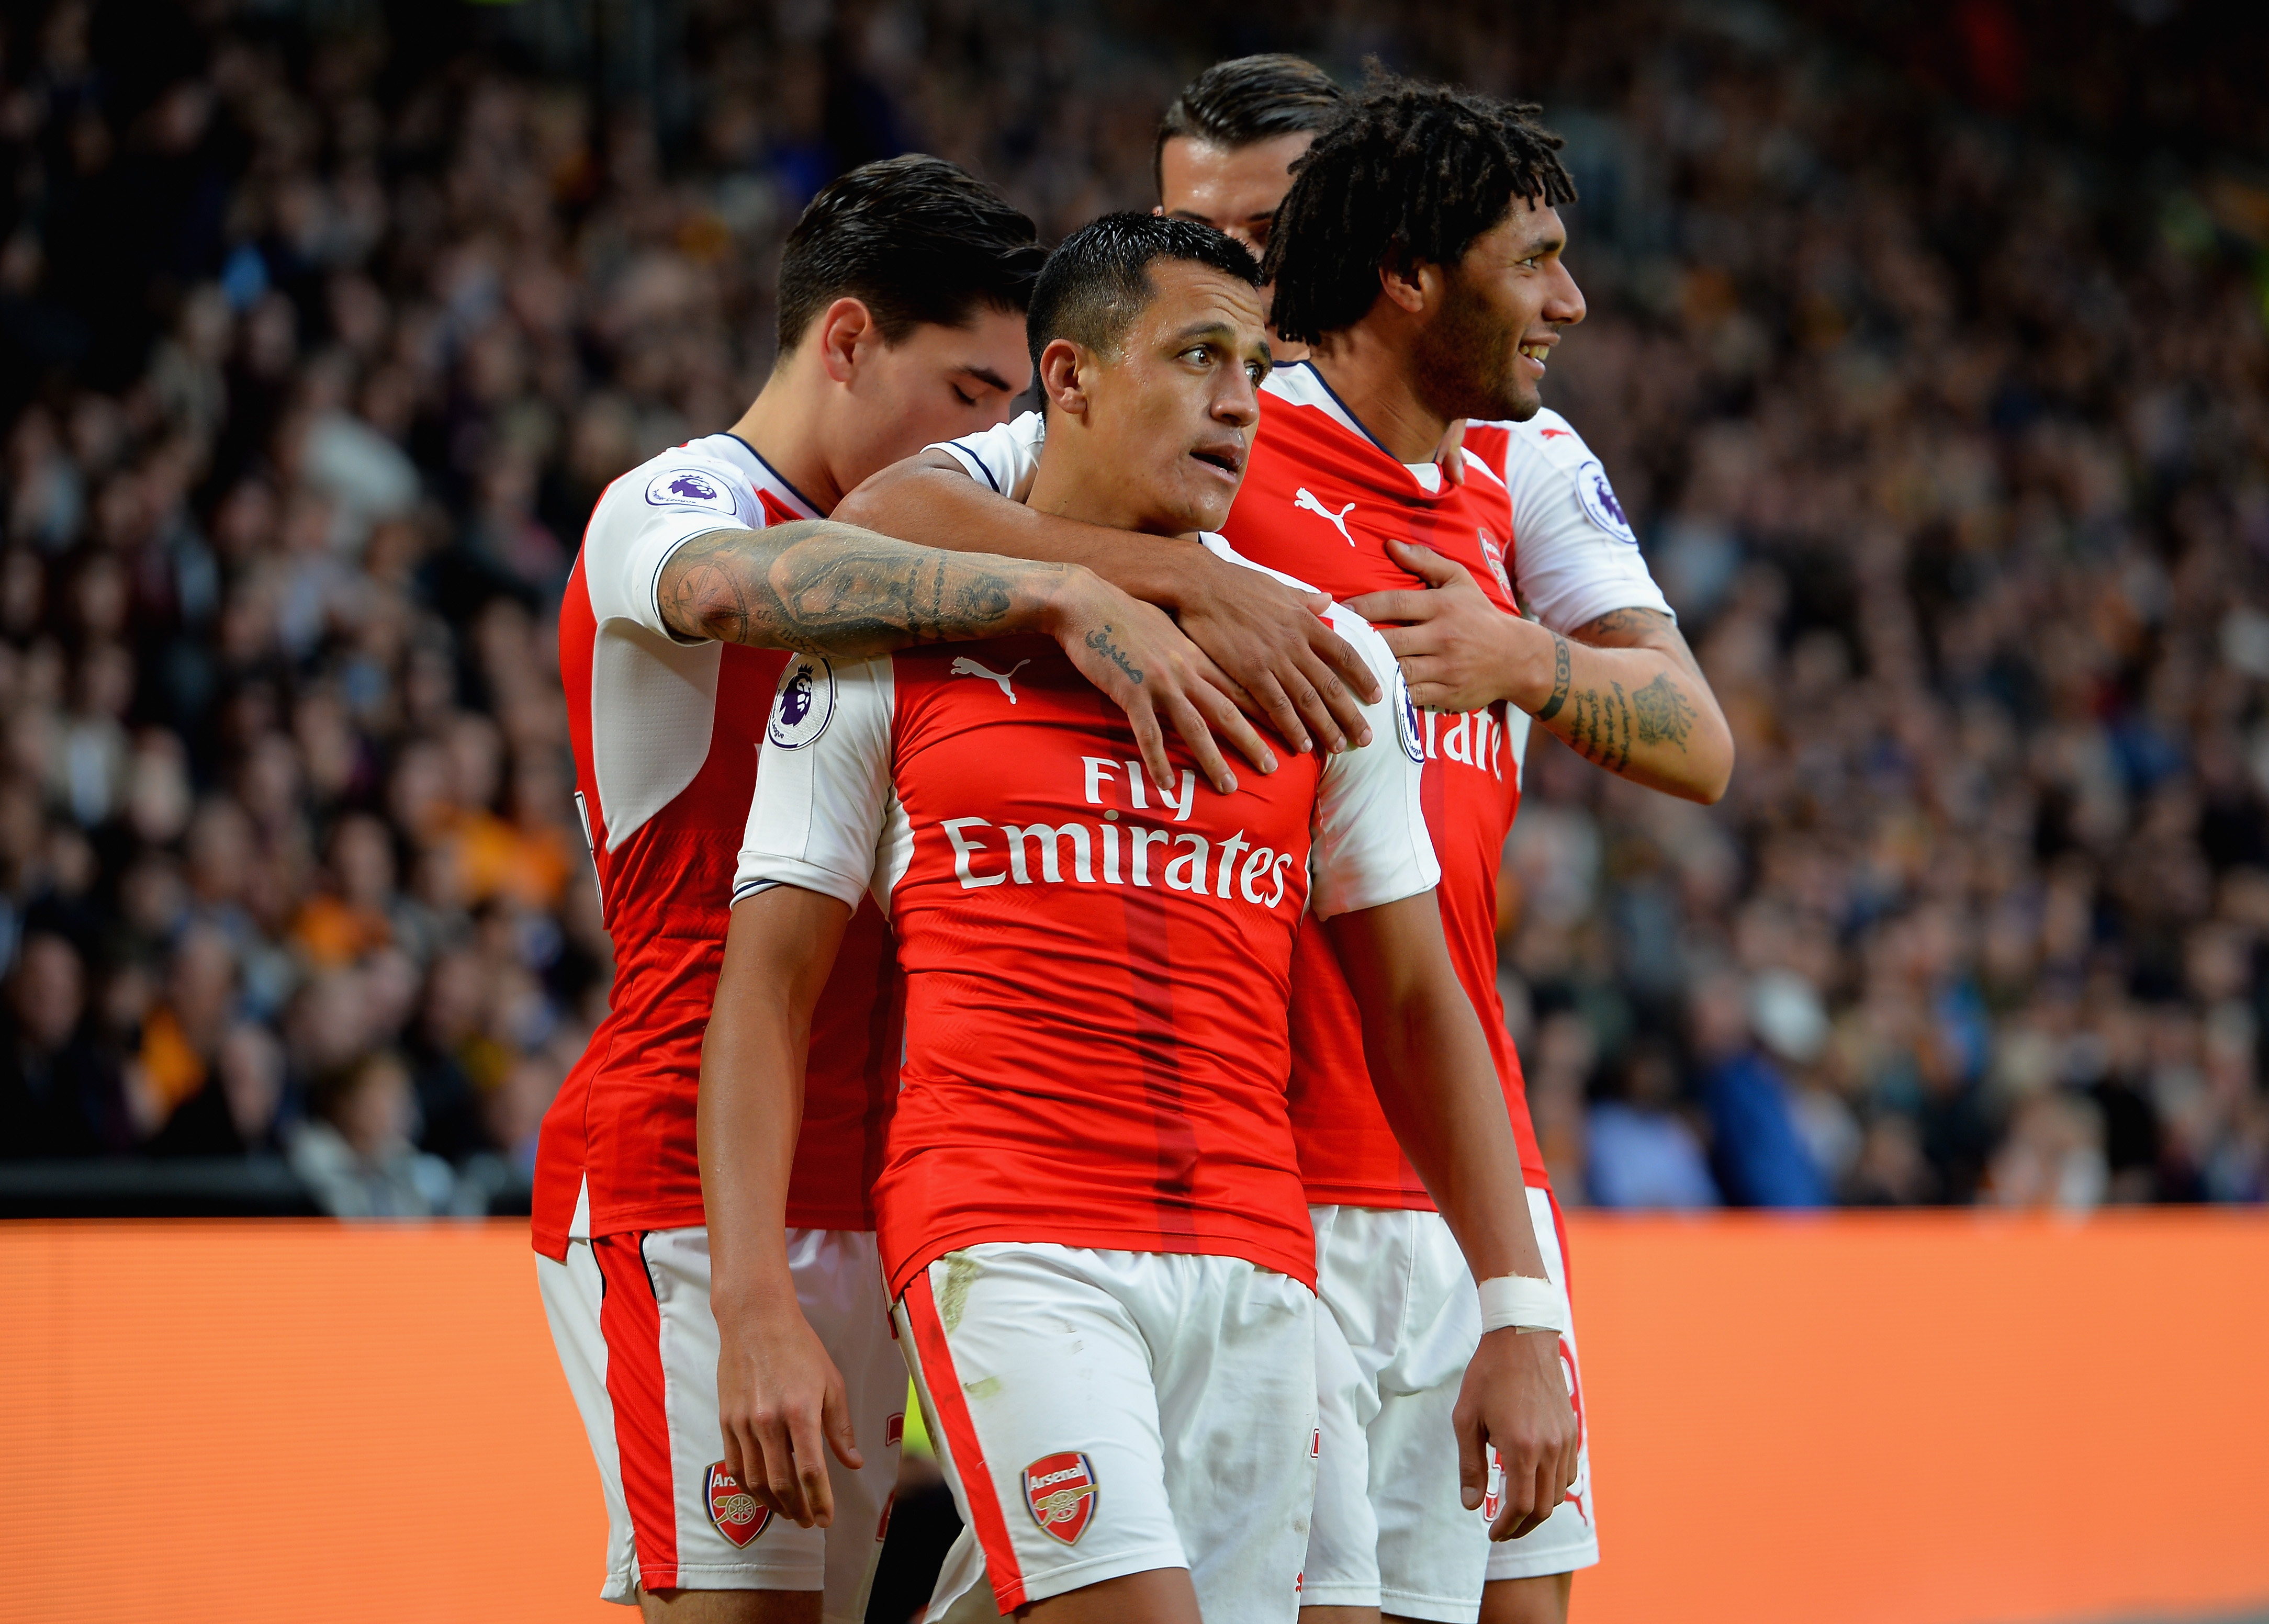 Arsenal-Chelsea Live Stream How to Watch Online for Free